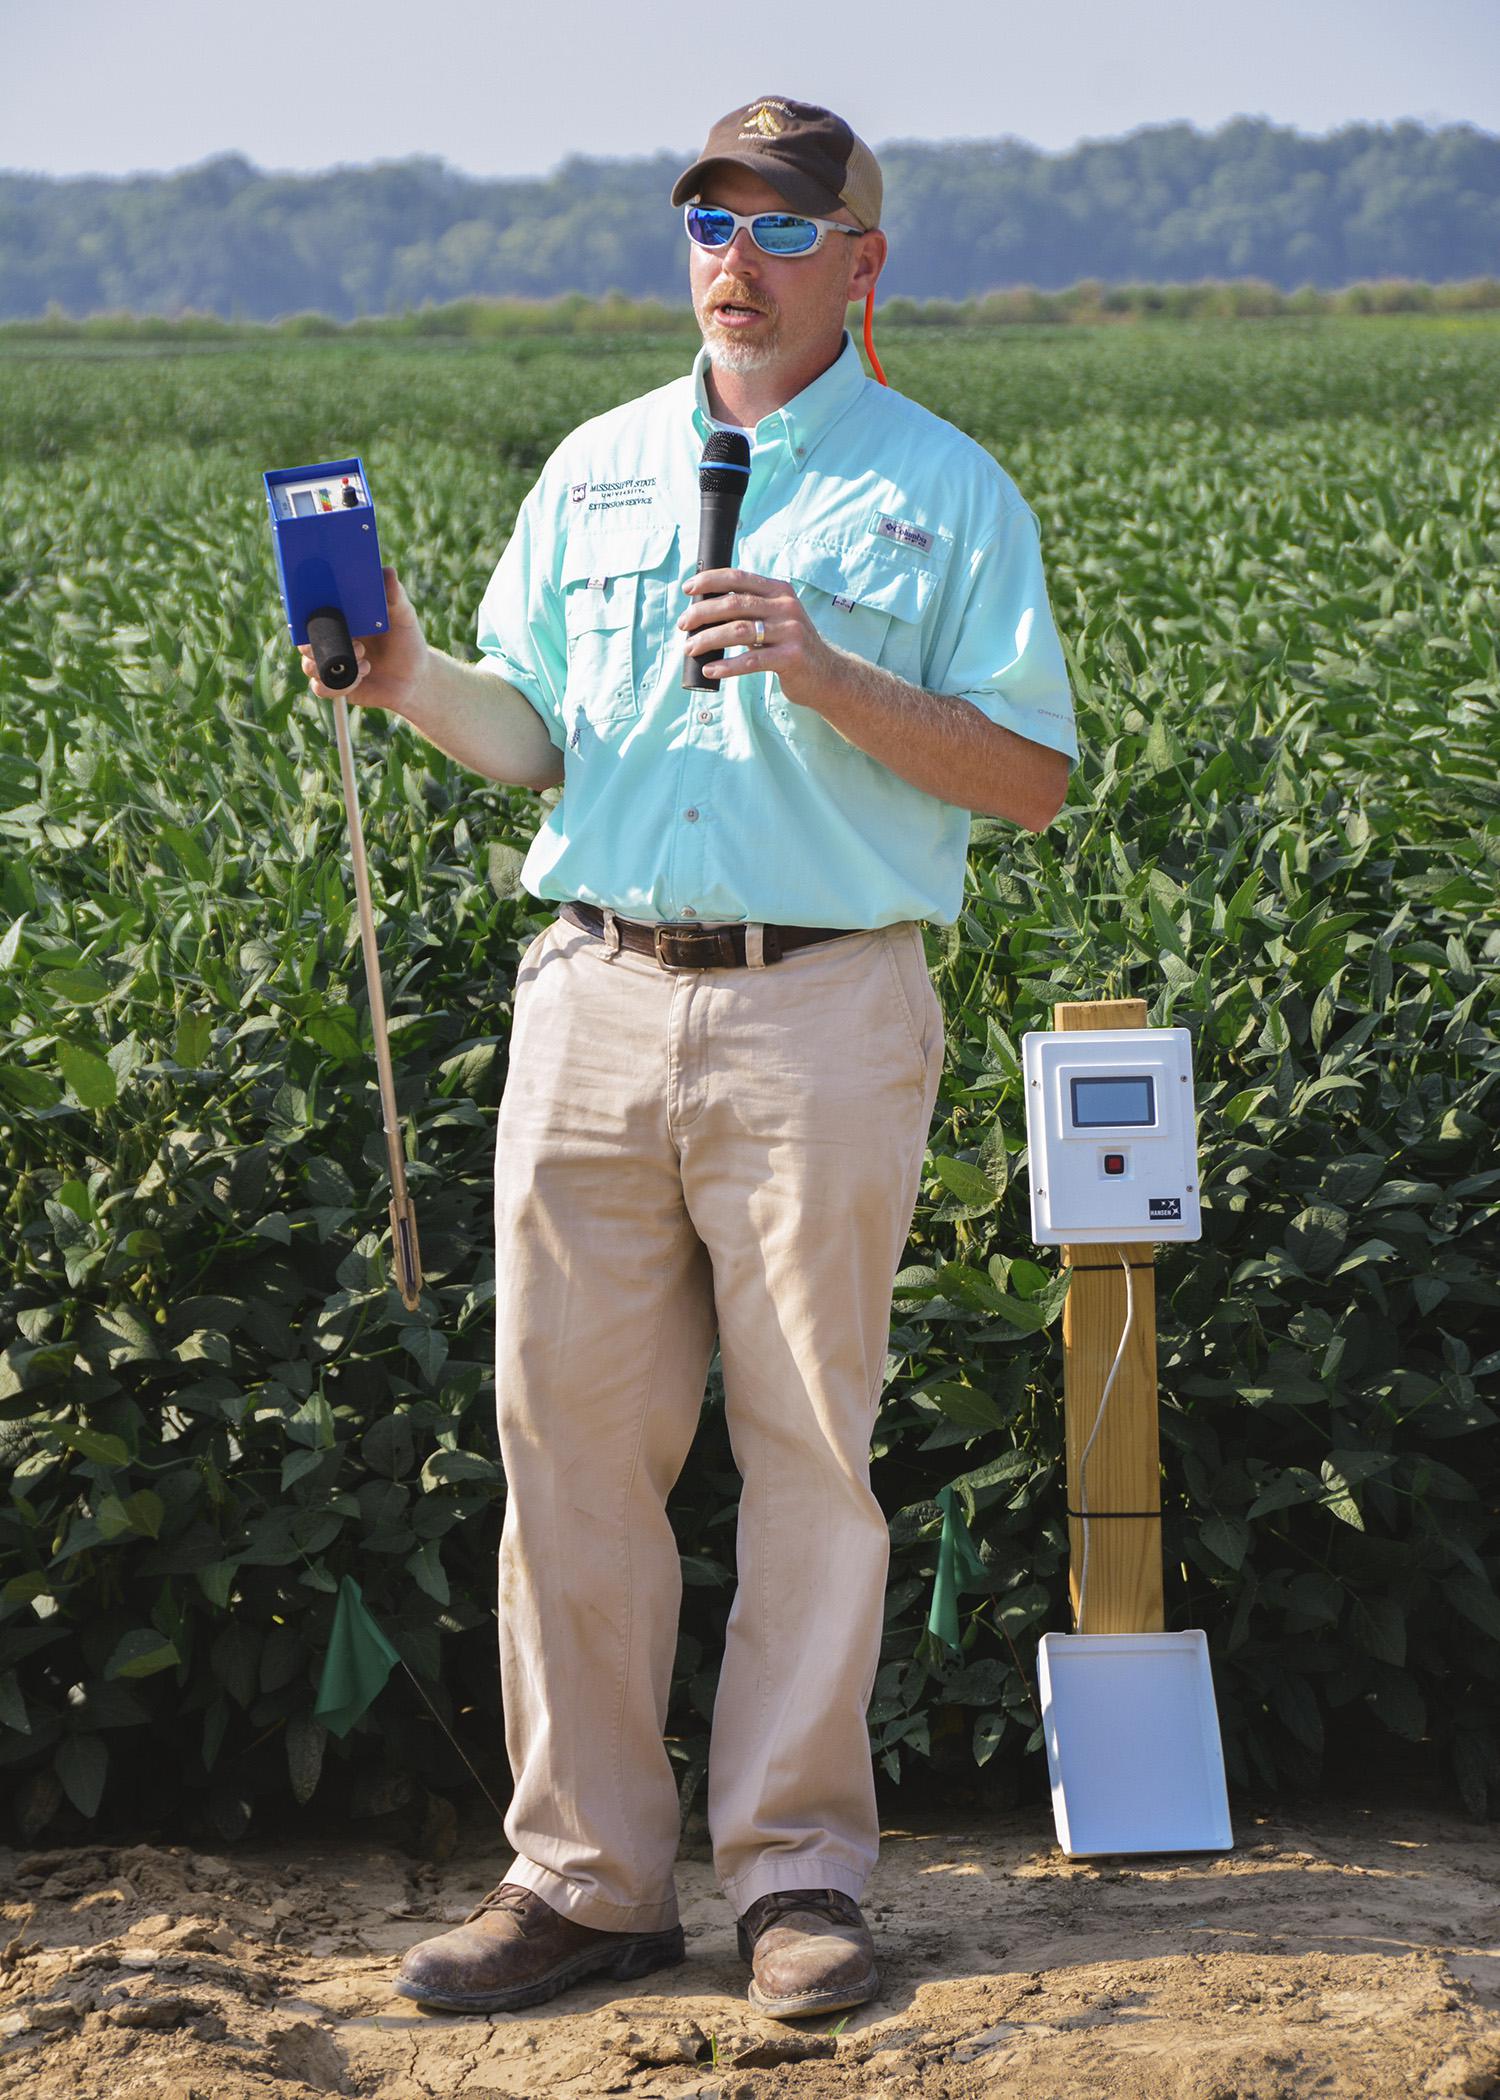 Jason Krutz, an irrigation specialist at the MSU Delta Research and Extension Center, reviews different types of moisture meters available to help farmers determine irrigation timing. Krutz took part in the North Mississippi Research and Extension Center's Agronomic Row Crops Field Day in Verona, Mississippi, on Aug. 7, 2014. (Photo by MSU Ag Communications/Linda Breazeale)